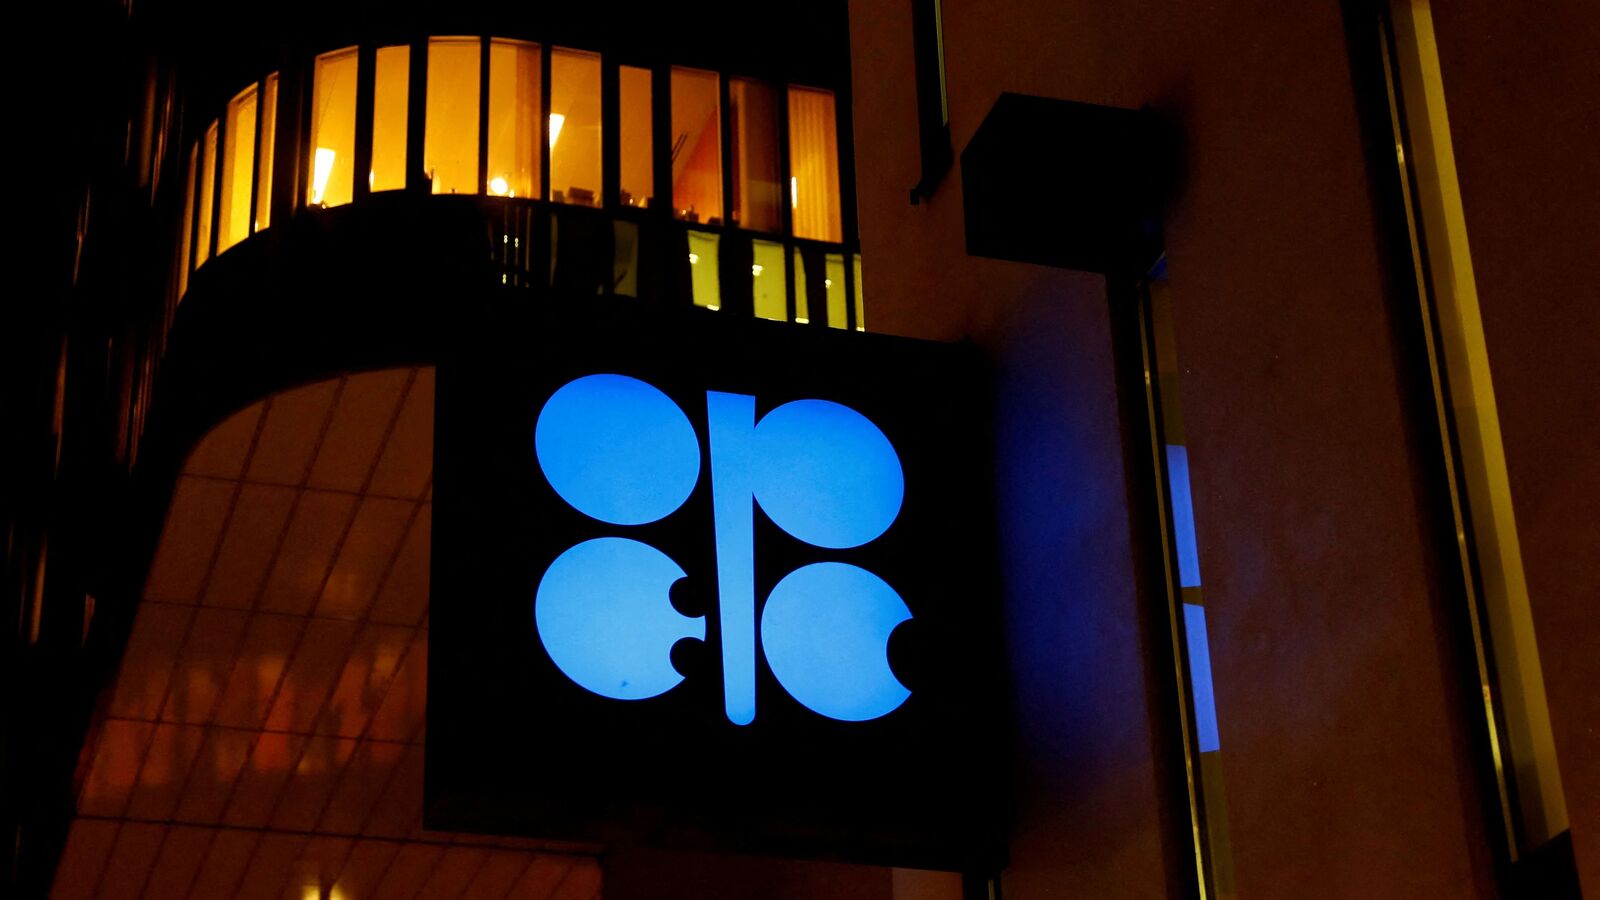 Explained | Why are crude oil prices elevated after OPEC+ policy decision and how will it impact India?